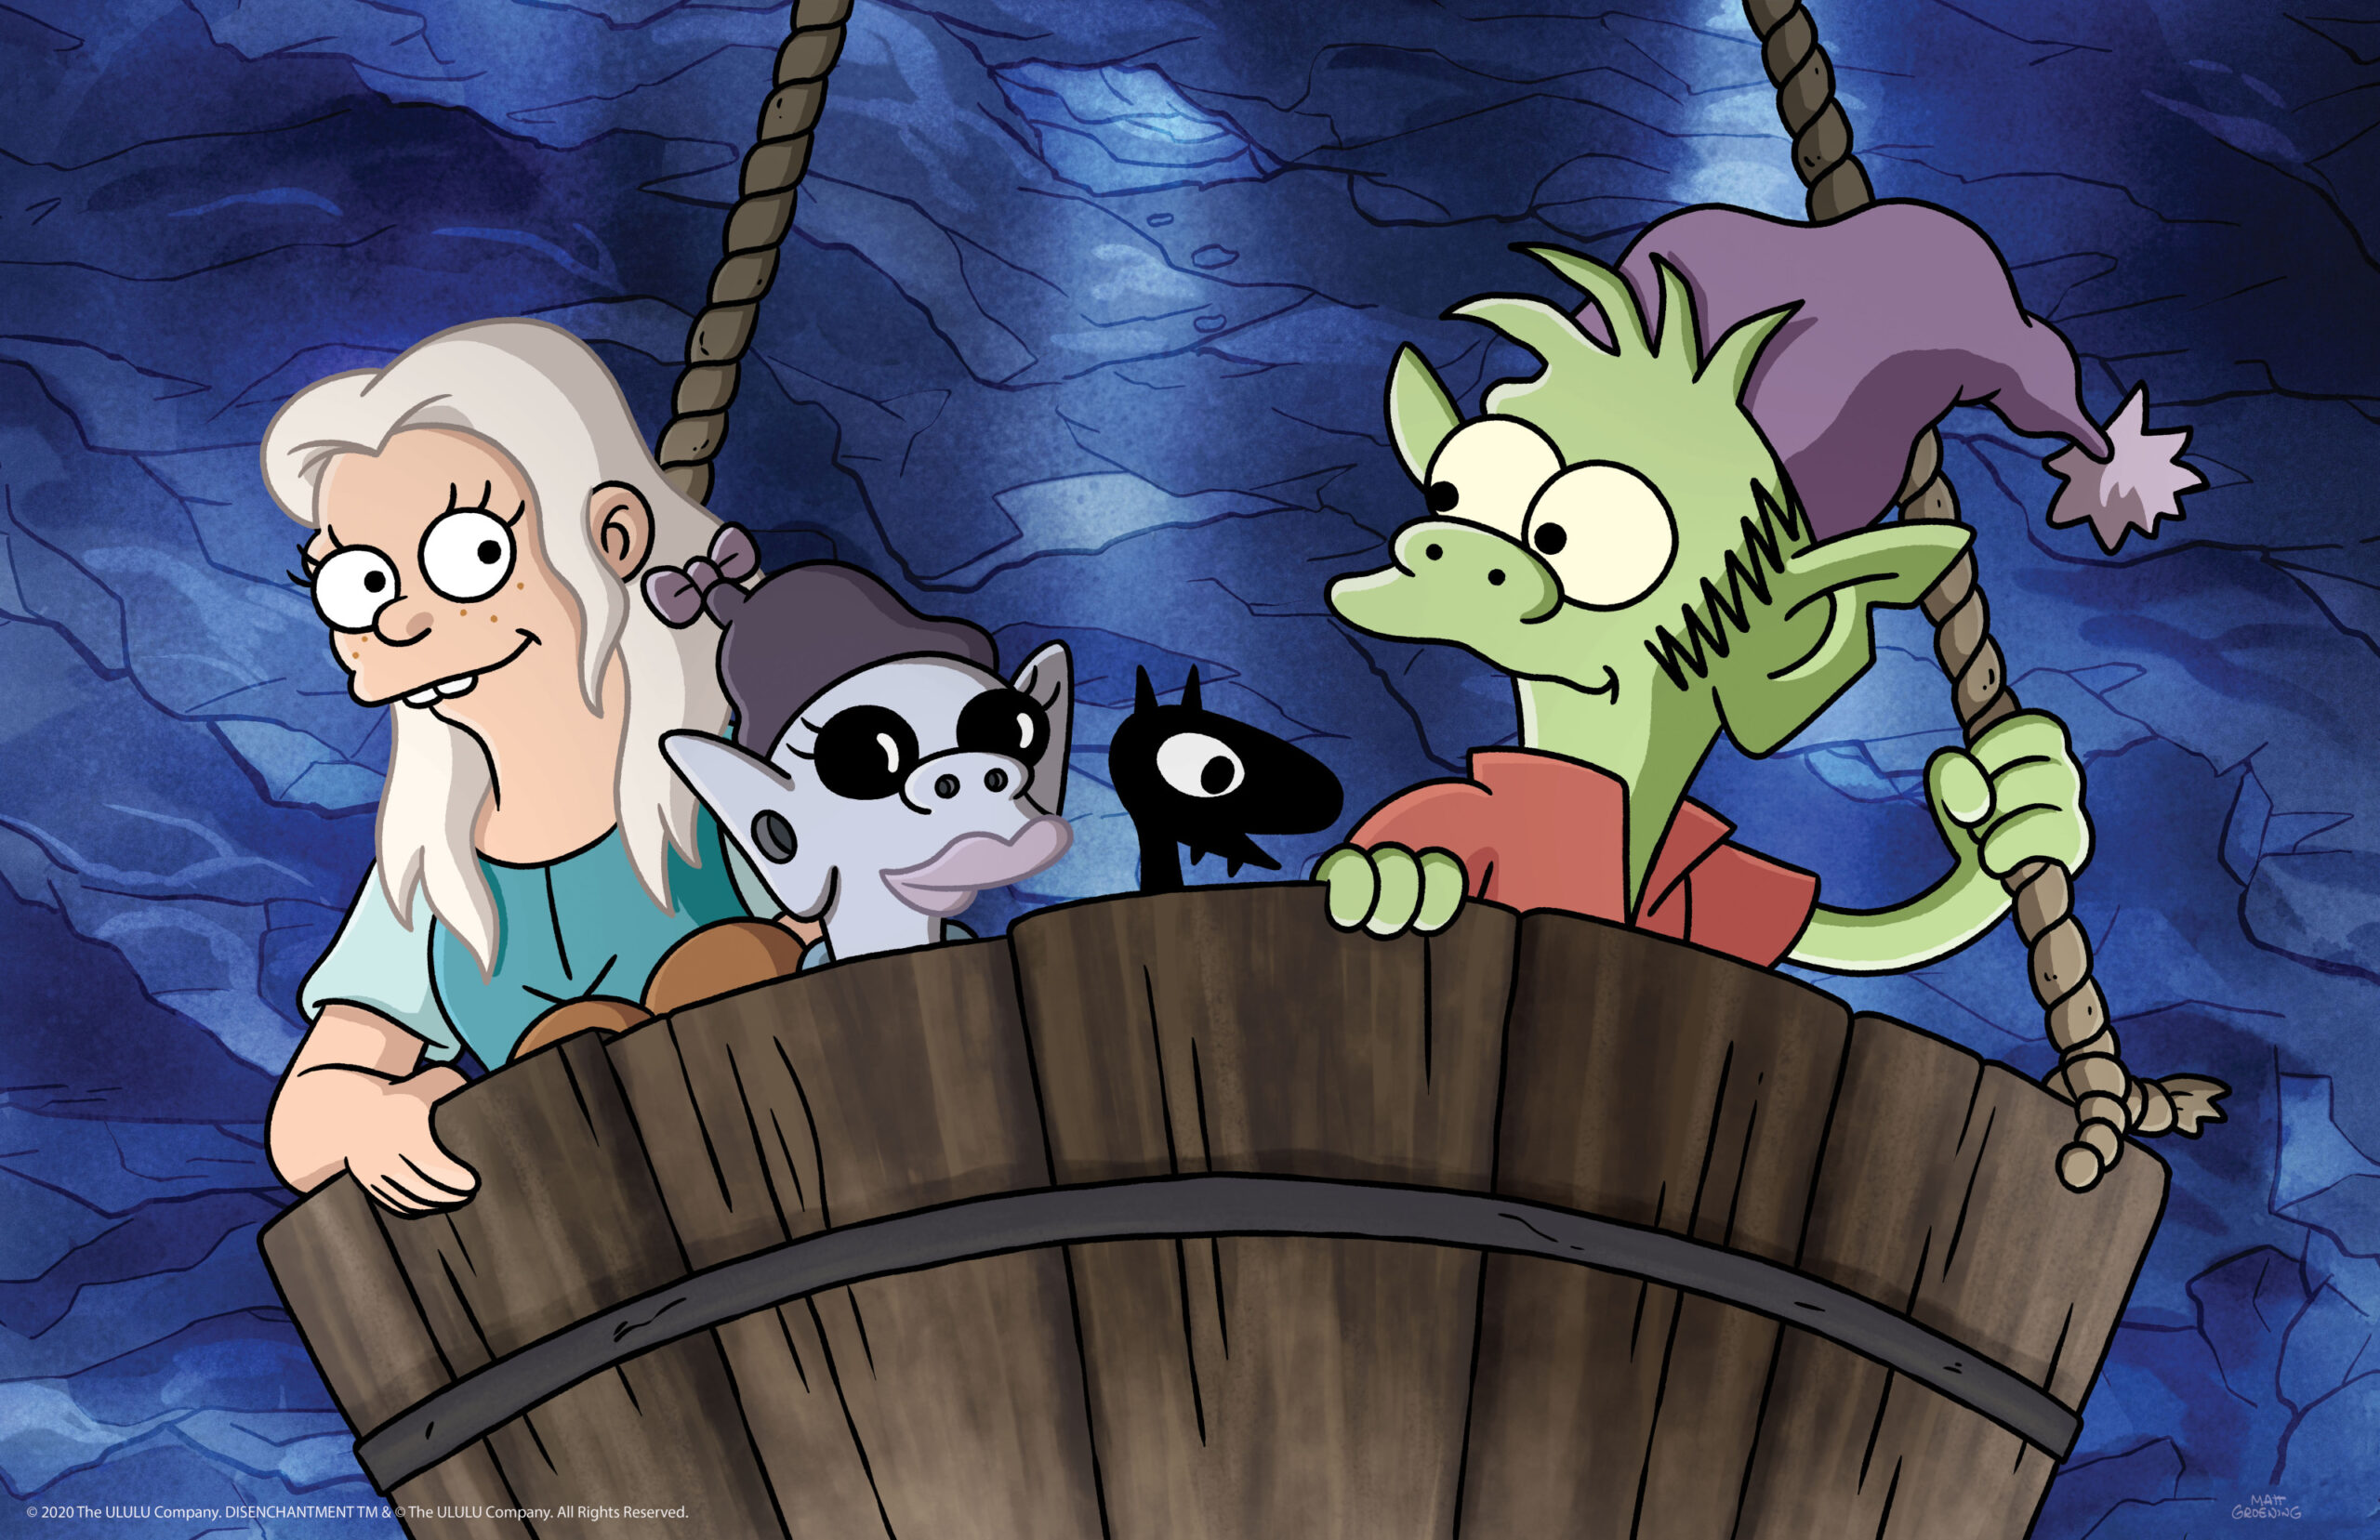 A scee from Disenchantment